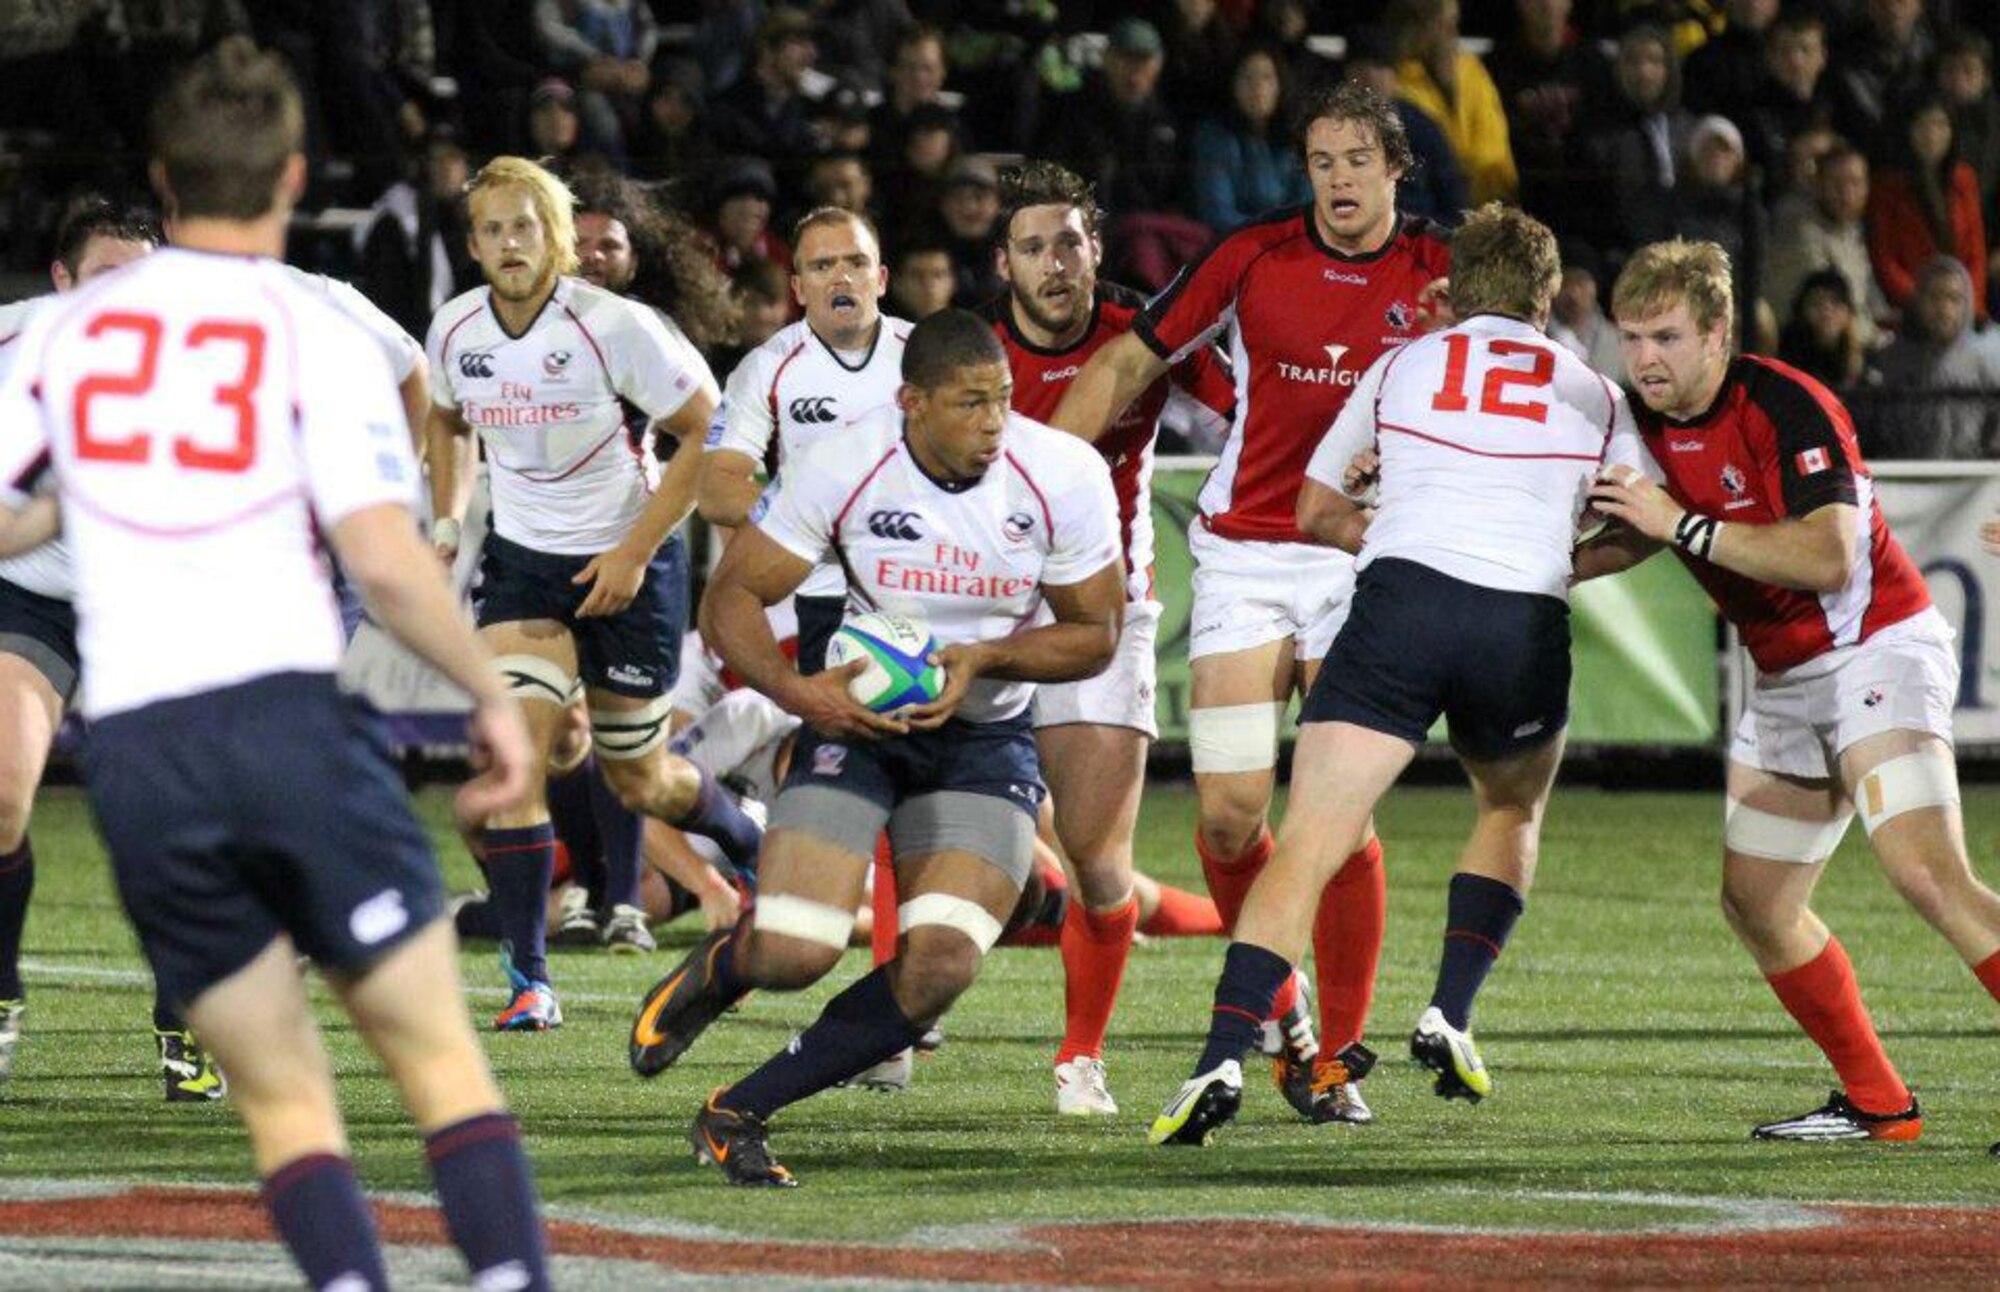 Capt. Eric Duechle, center, was a member of the U.S. Air Force rugby 7s team and a 2016 World Class Athlete Program participant. Duechle played rugby at the U.S. Air Force Academy, where he was a second-team All-American. (Courtesy photo)